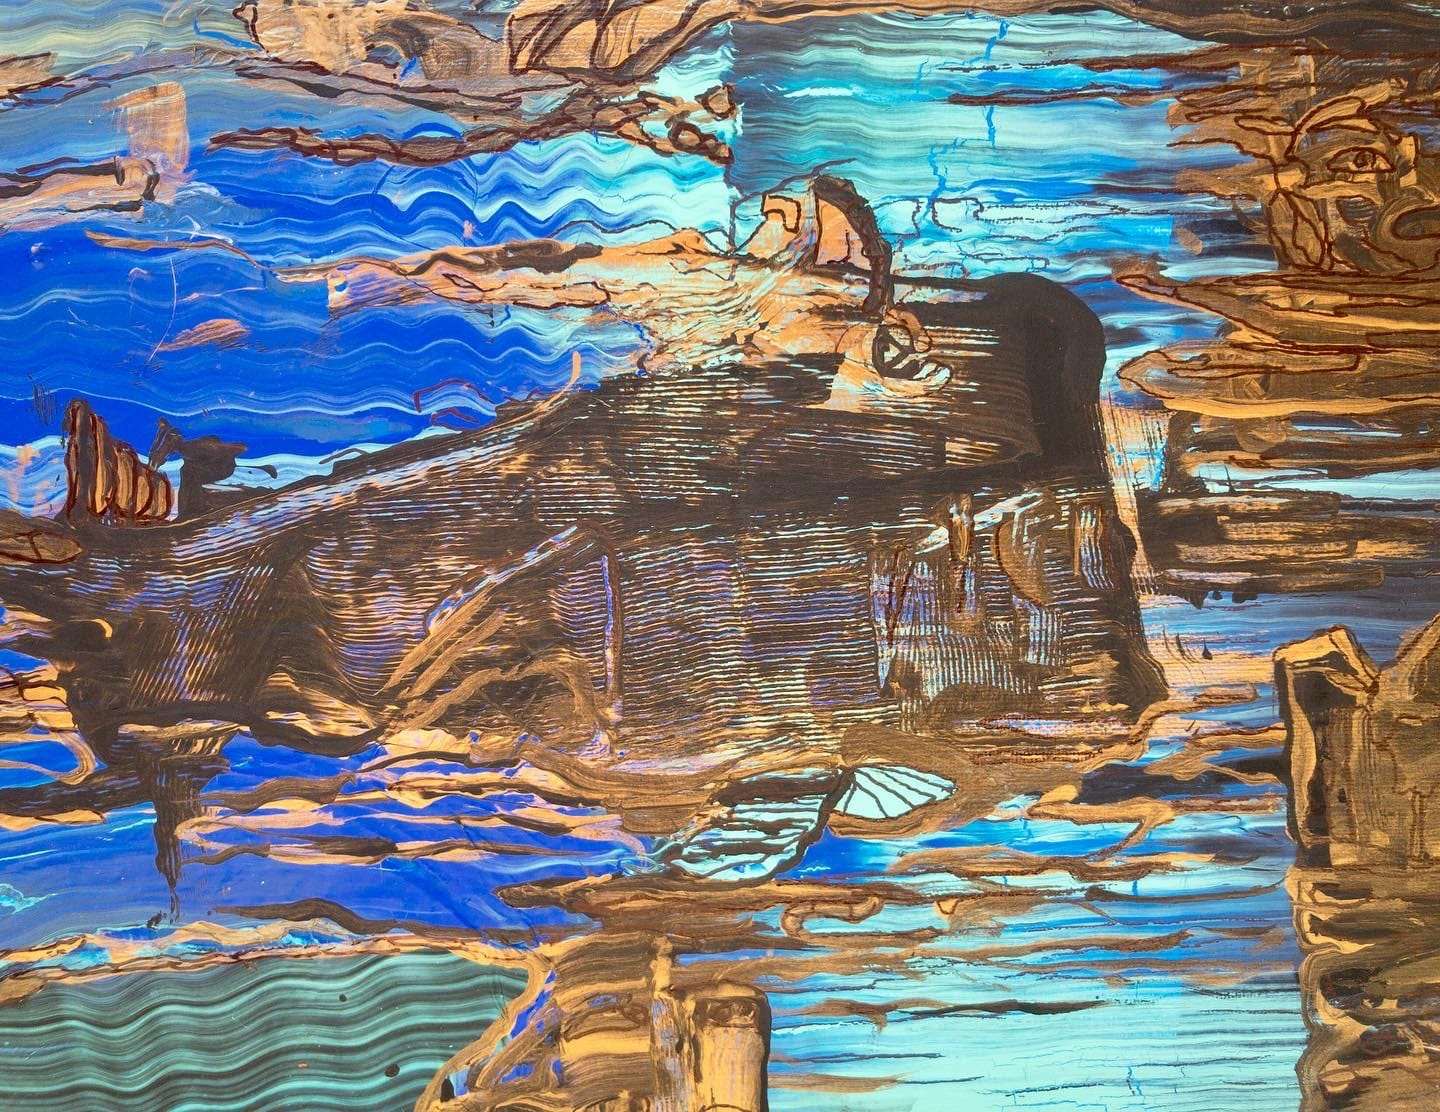 On The Lake - Large Size, Mixed Media, Creepy And Morbid, Haunted Lake With Ghosts And Gold Accents, Painting by Art With Evie